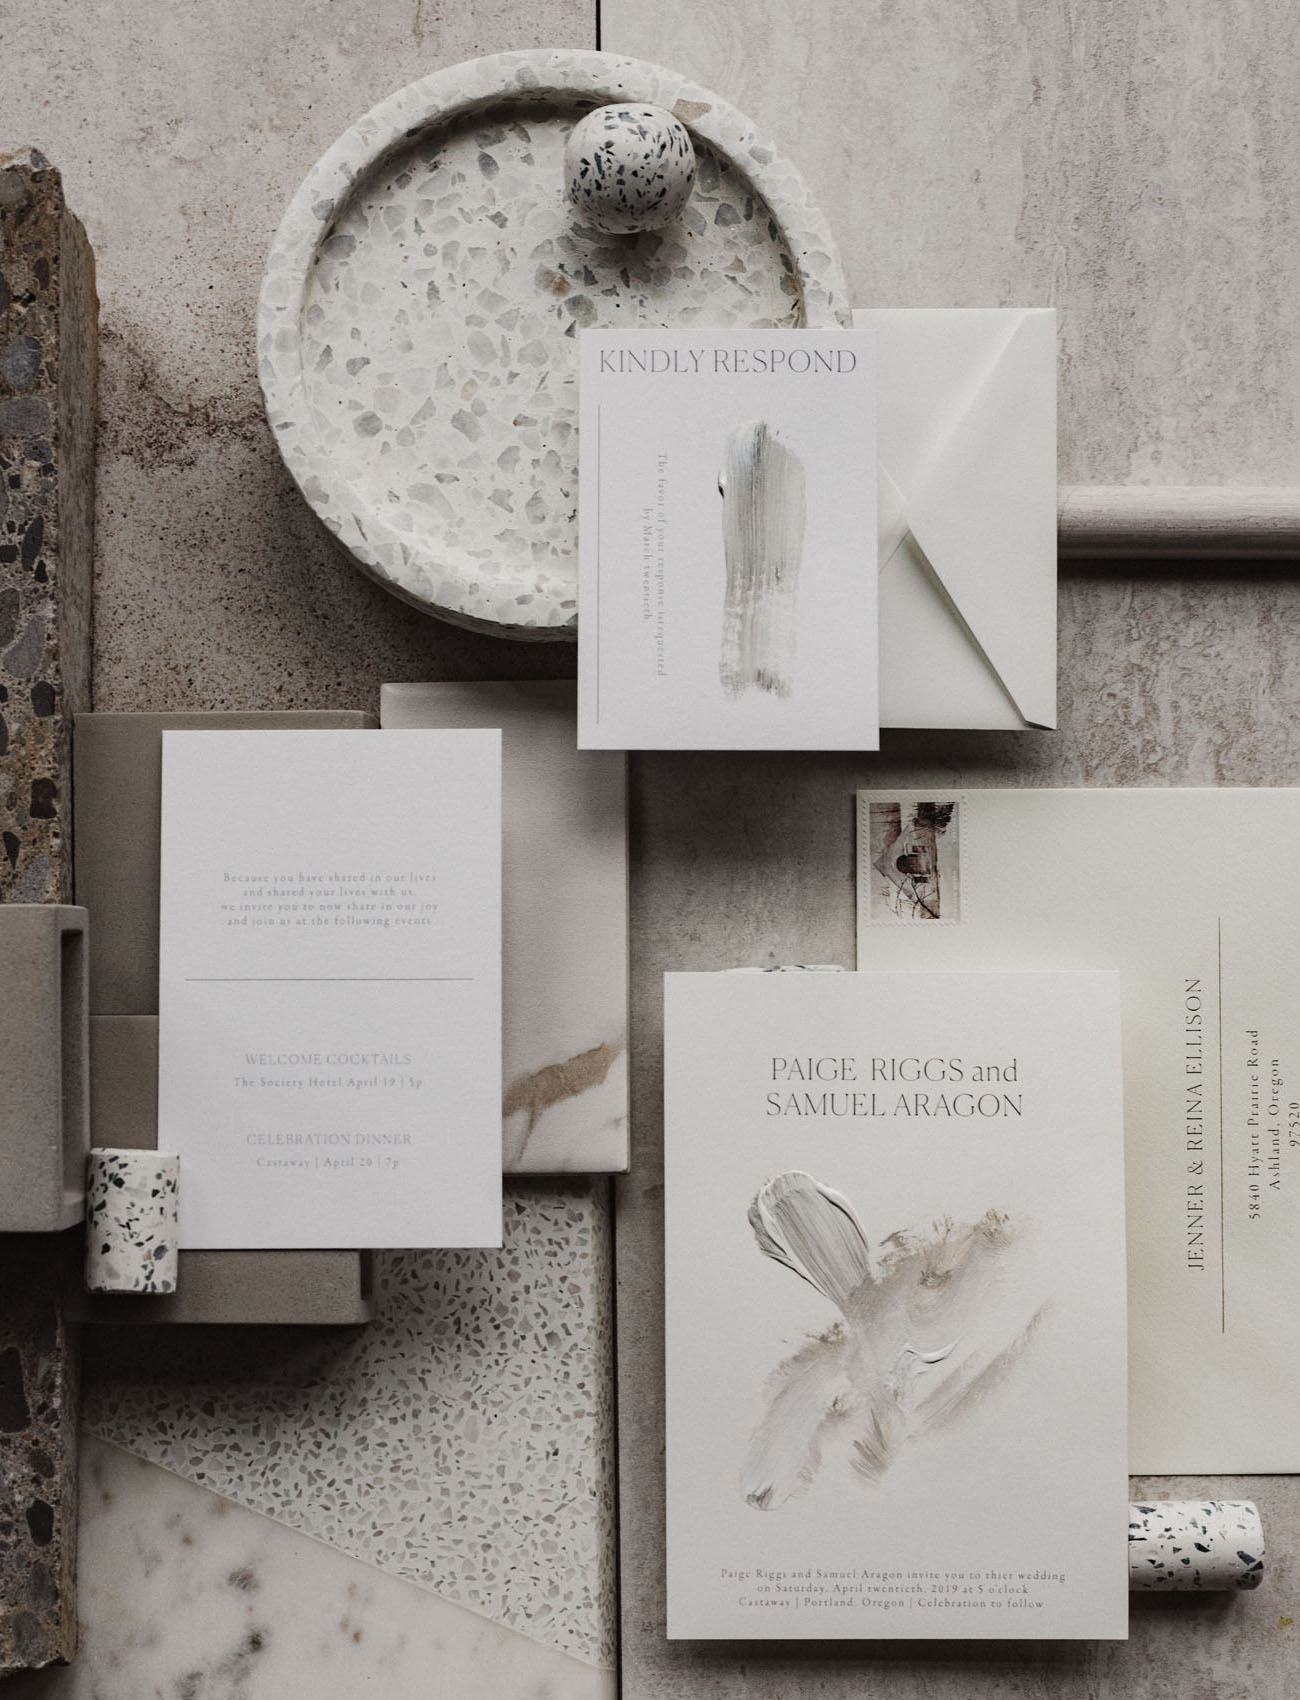 The wedding invitation suite is done in muted and neutral tones, with minimal aesthetics